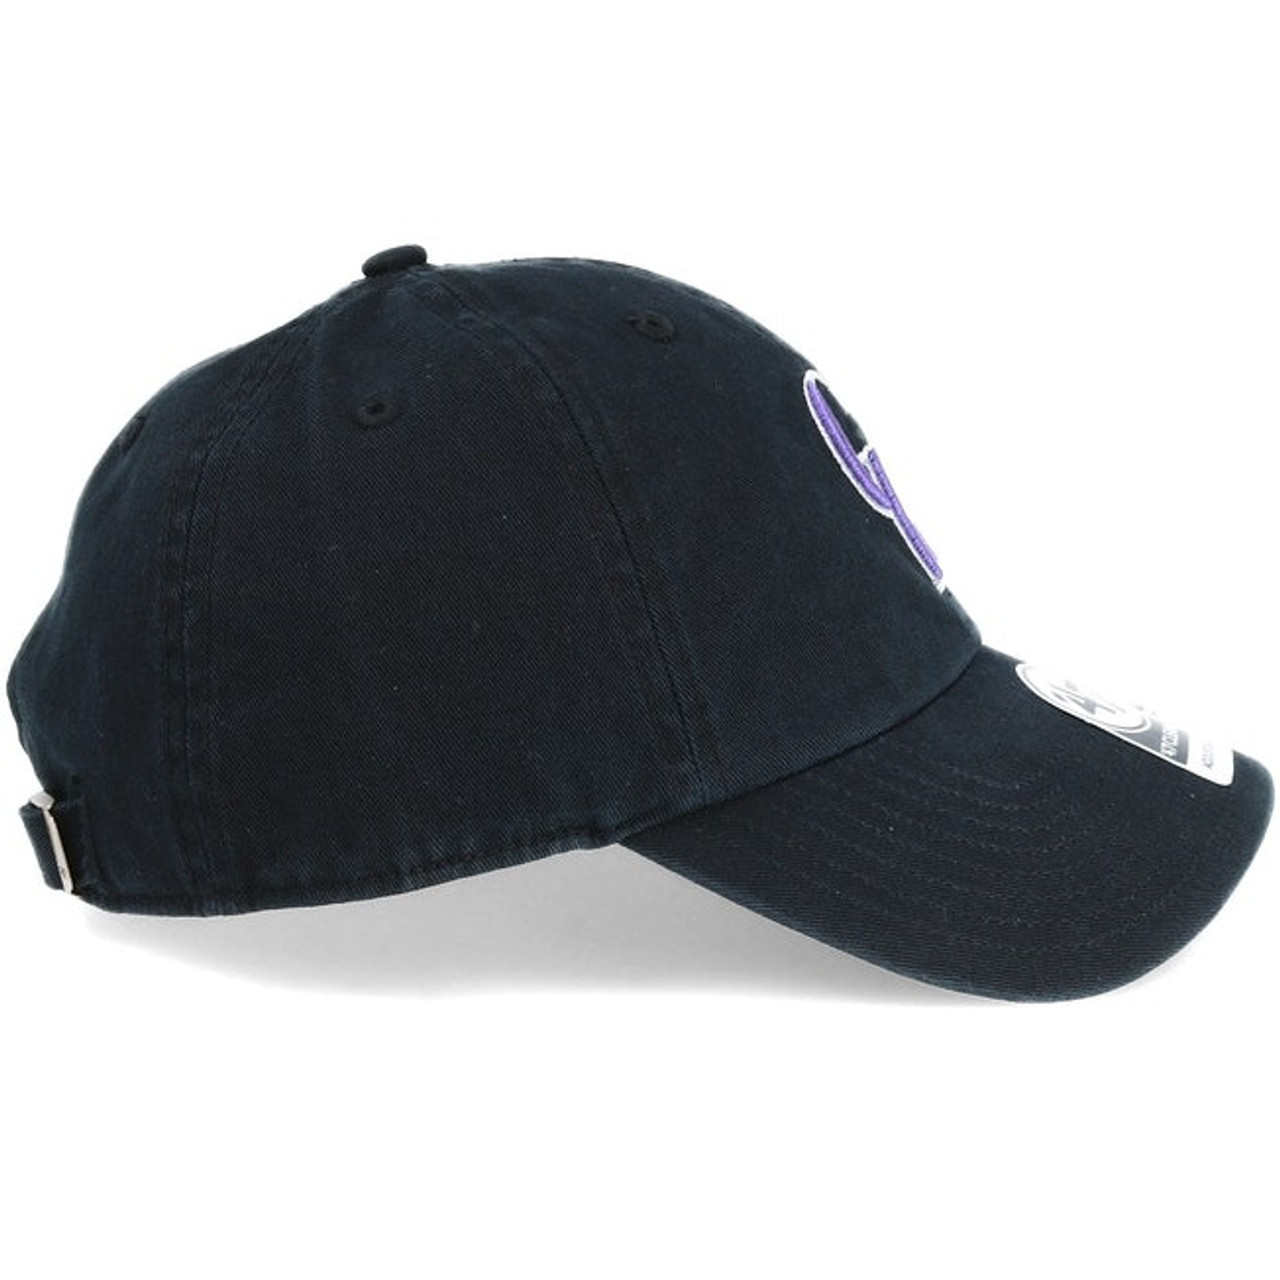 Men's '47 Black Colorado Rockies Cooperstown Collection Franchise Fitted Hat Size: Extra Large